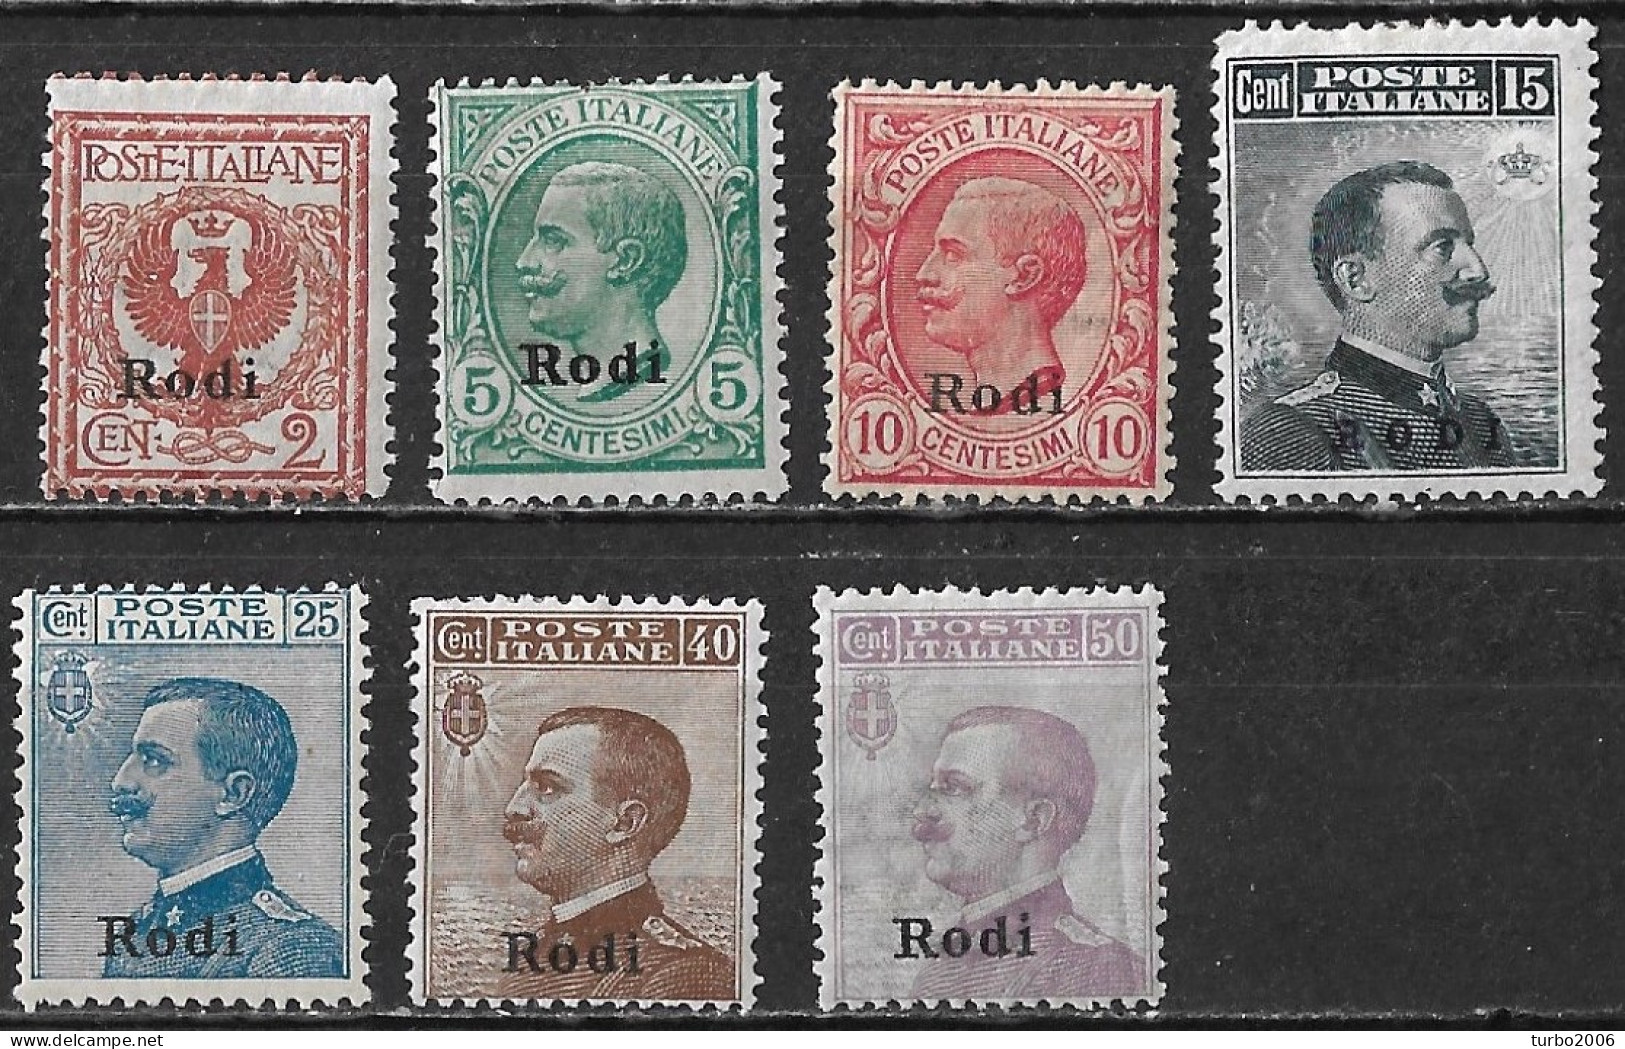 DODECANESE 1912 Stamps Of Italy With Black Overprint RODI Complete MH Set Vl. 1 / 7 - Dodecanese